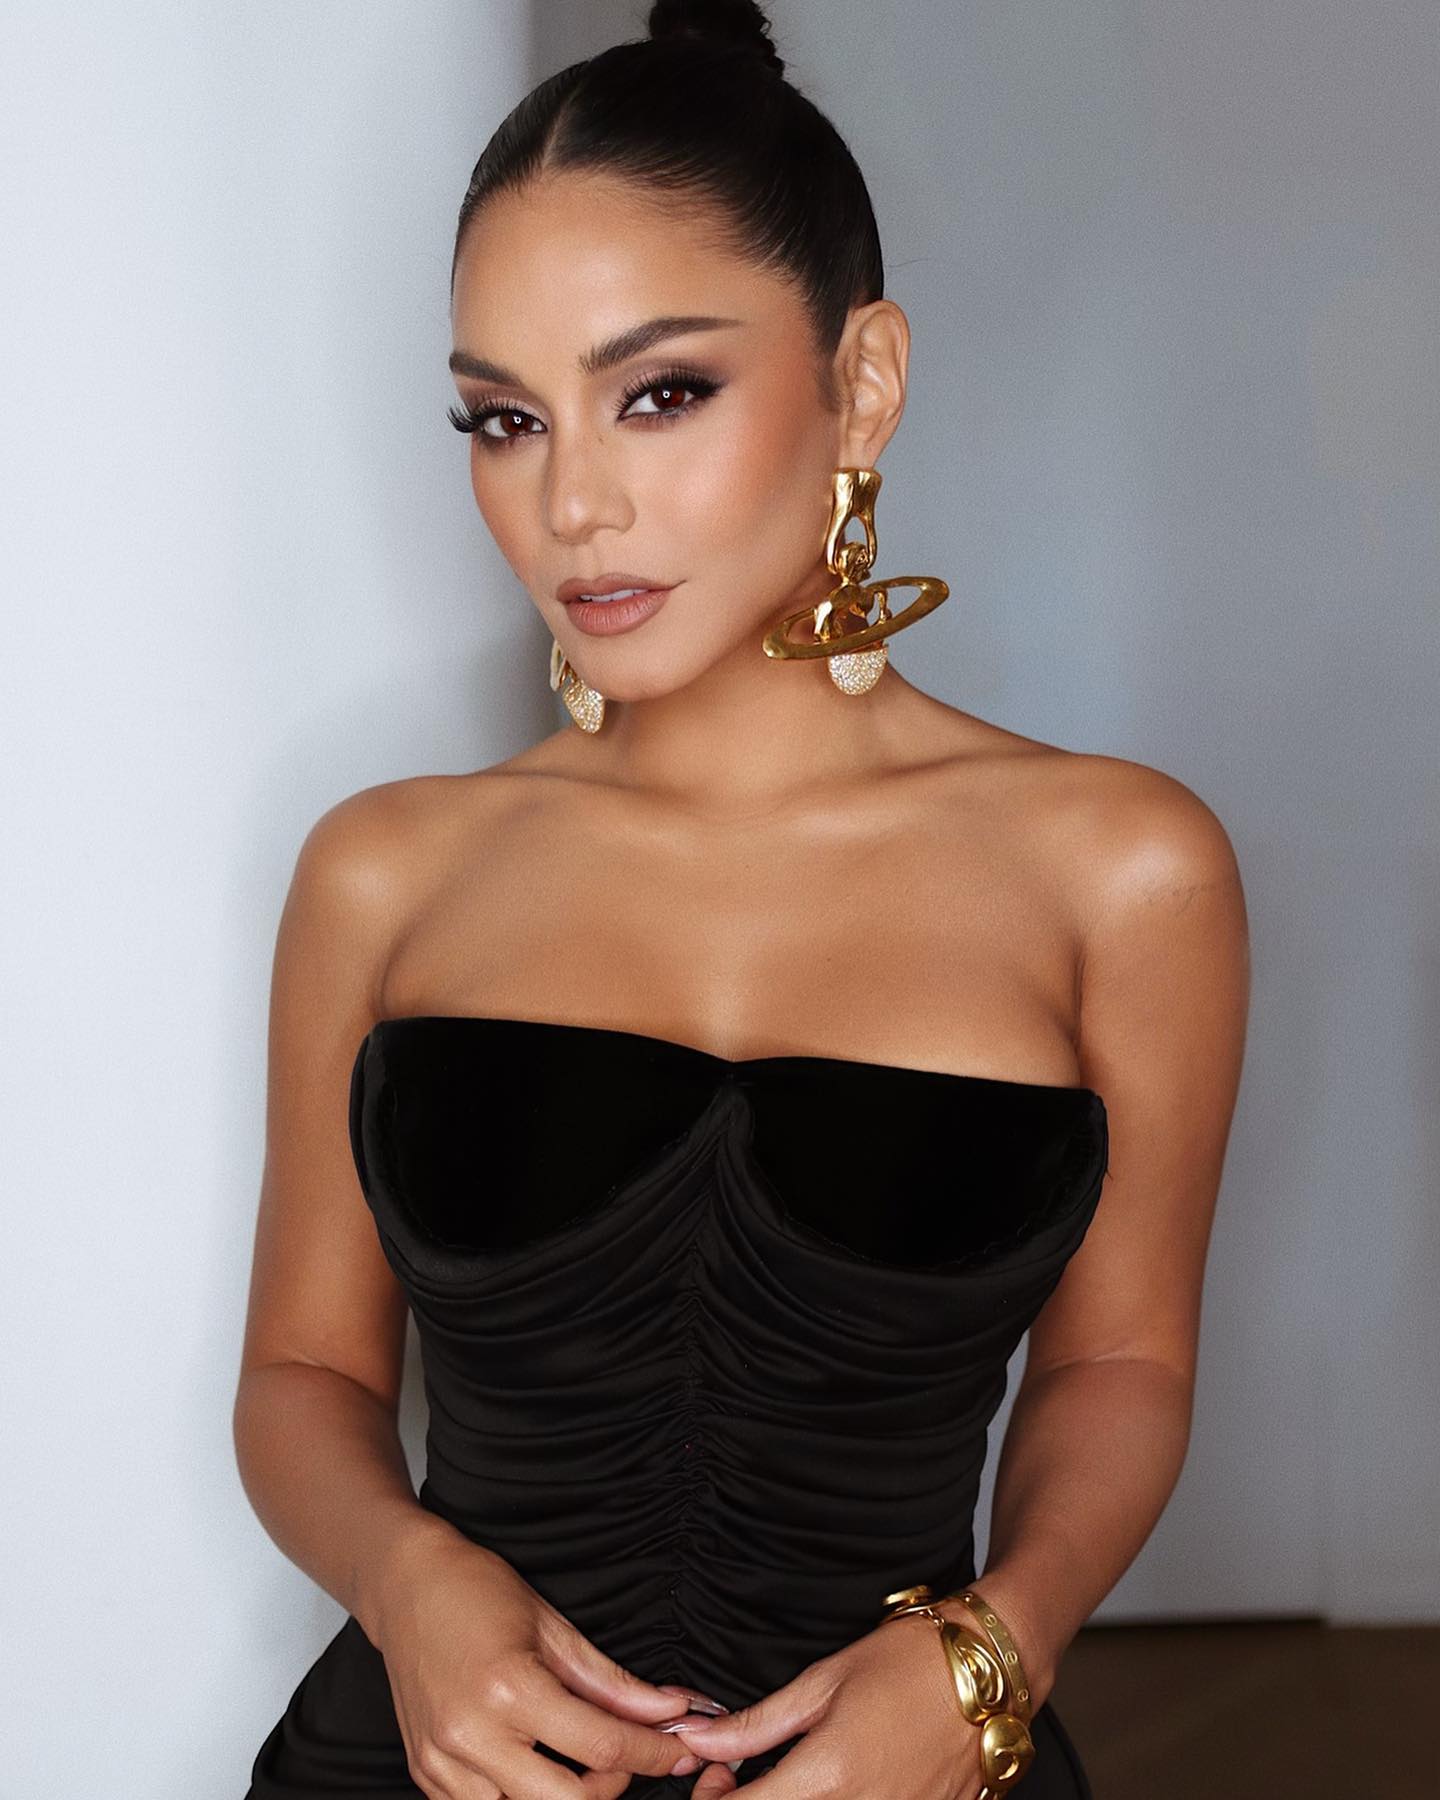 Vanessa Hudgens Measurements, Bra Size, Age, Height and Weight